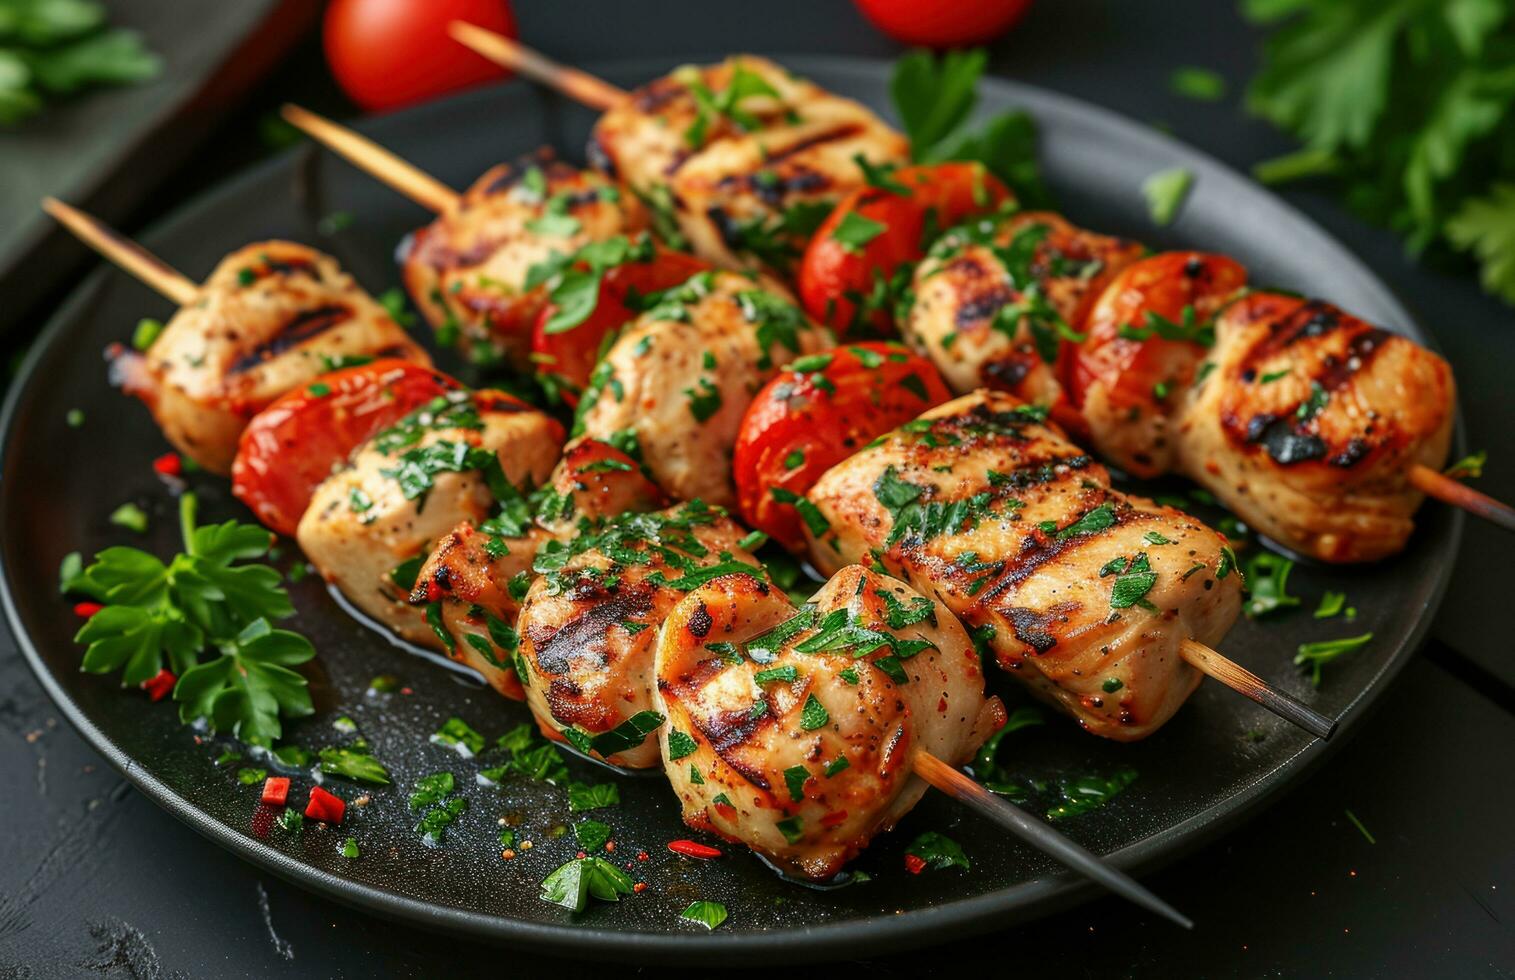 AI generated grilled chicken on kabob with tomatoes and thyme on a wooden board photo